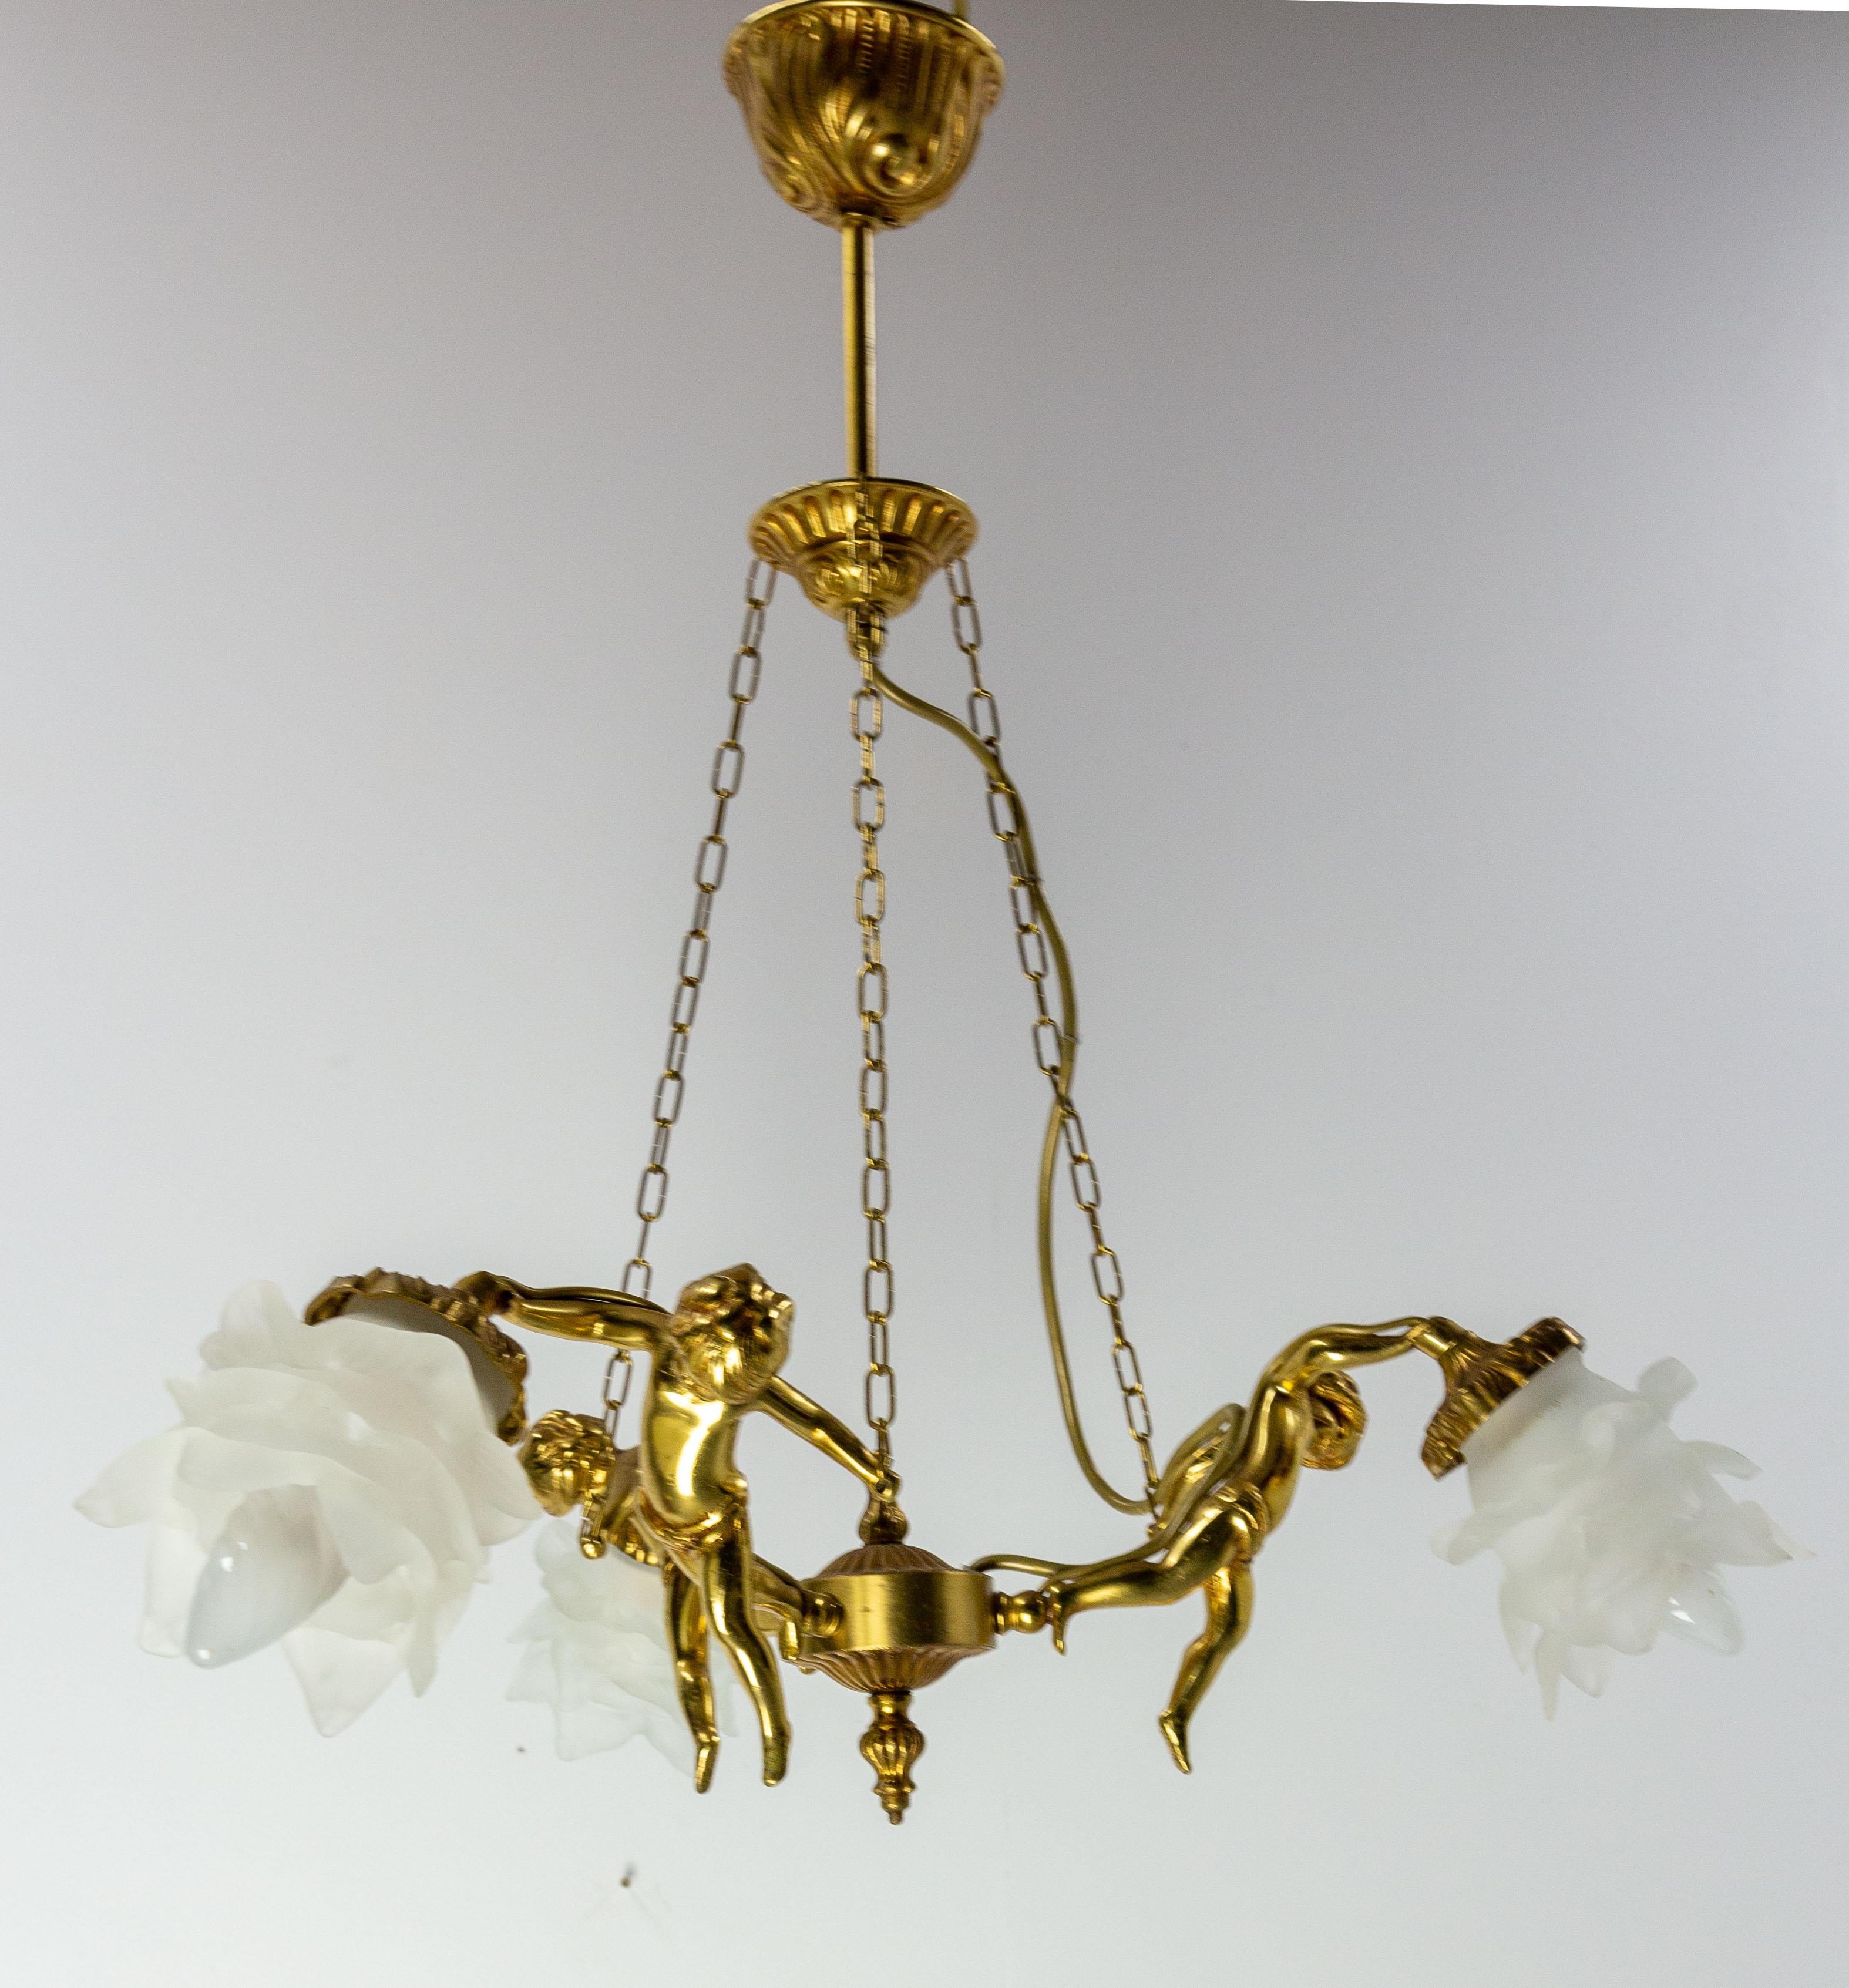 20th Century French Brass Ceiling Lamp with Three Putti Pendant Lustre, circa 1970